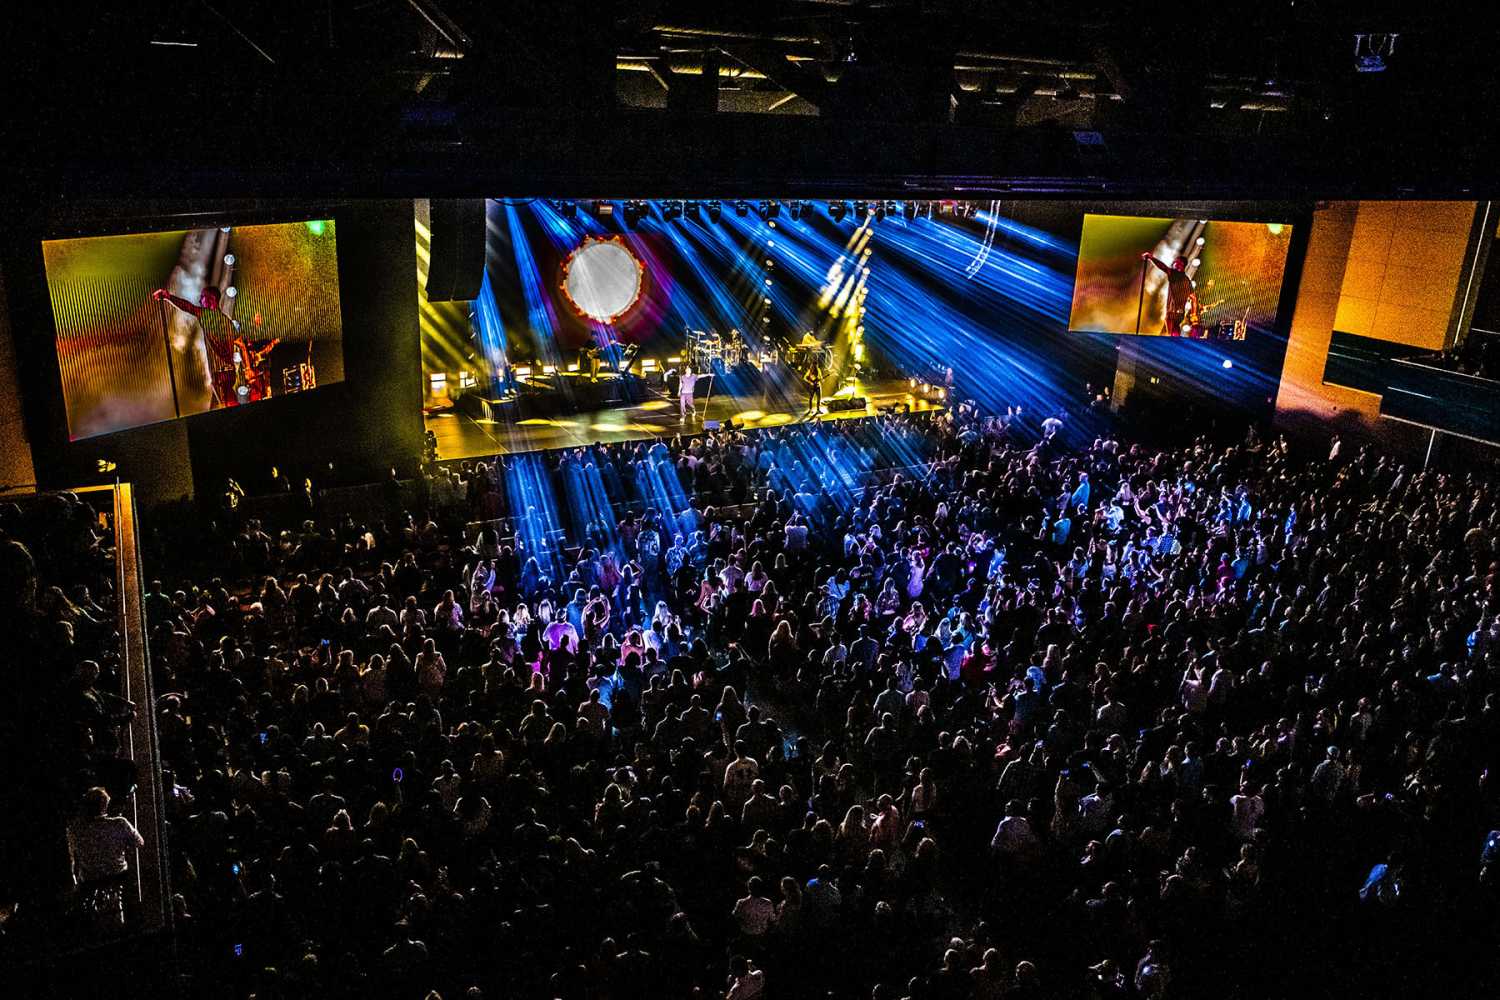 Hard Rock Live is now poised to be a premier concert destination